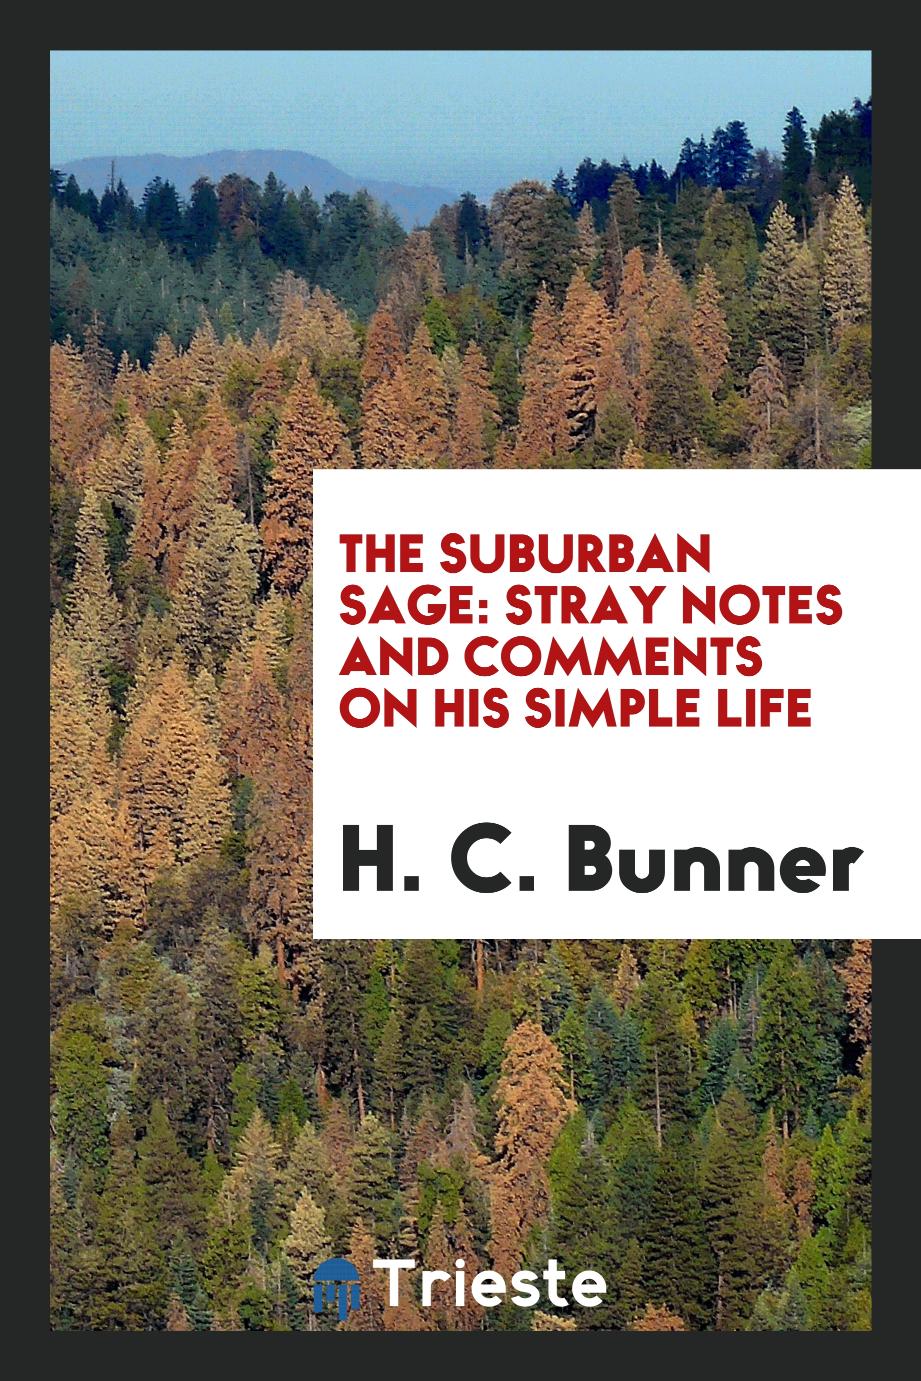 The suburban sage: stray notes and comments on his simple life